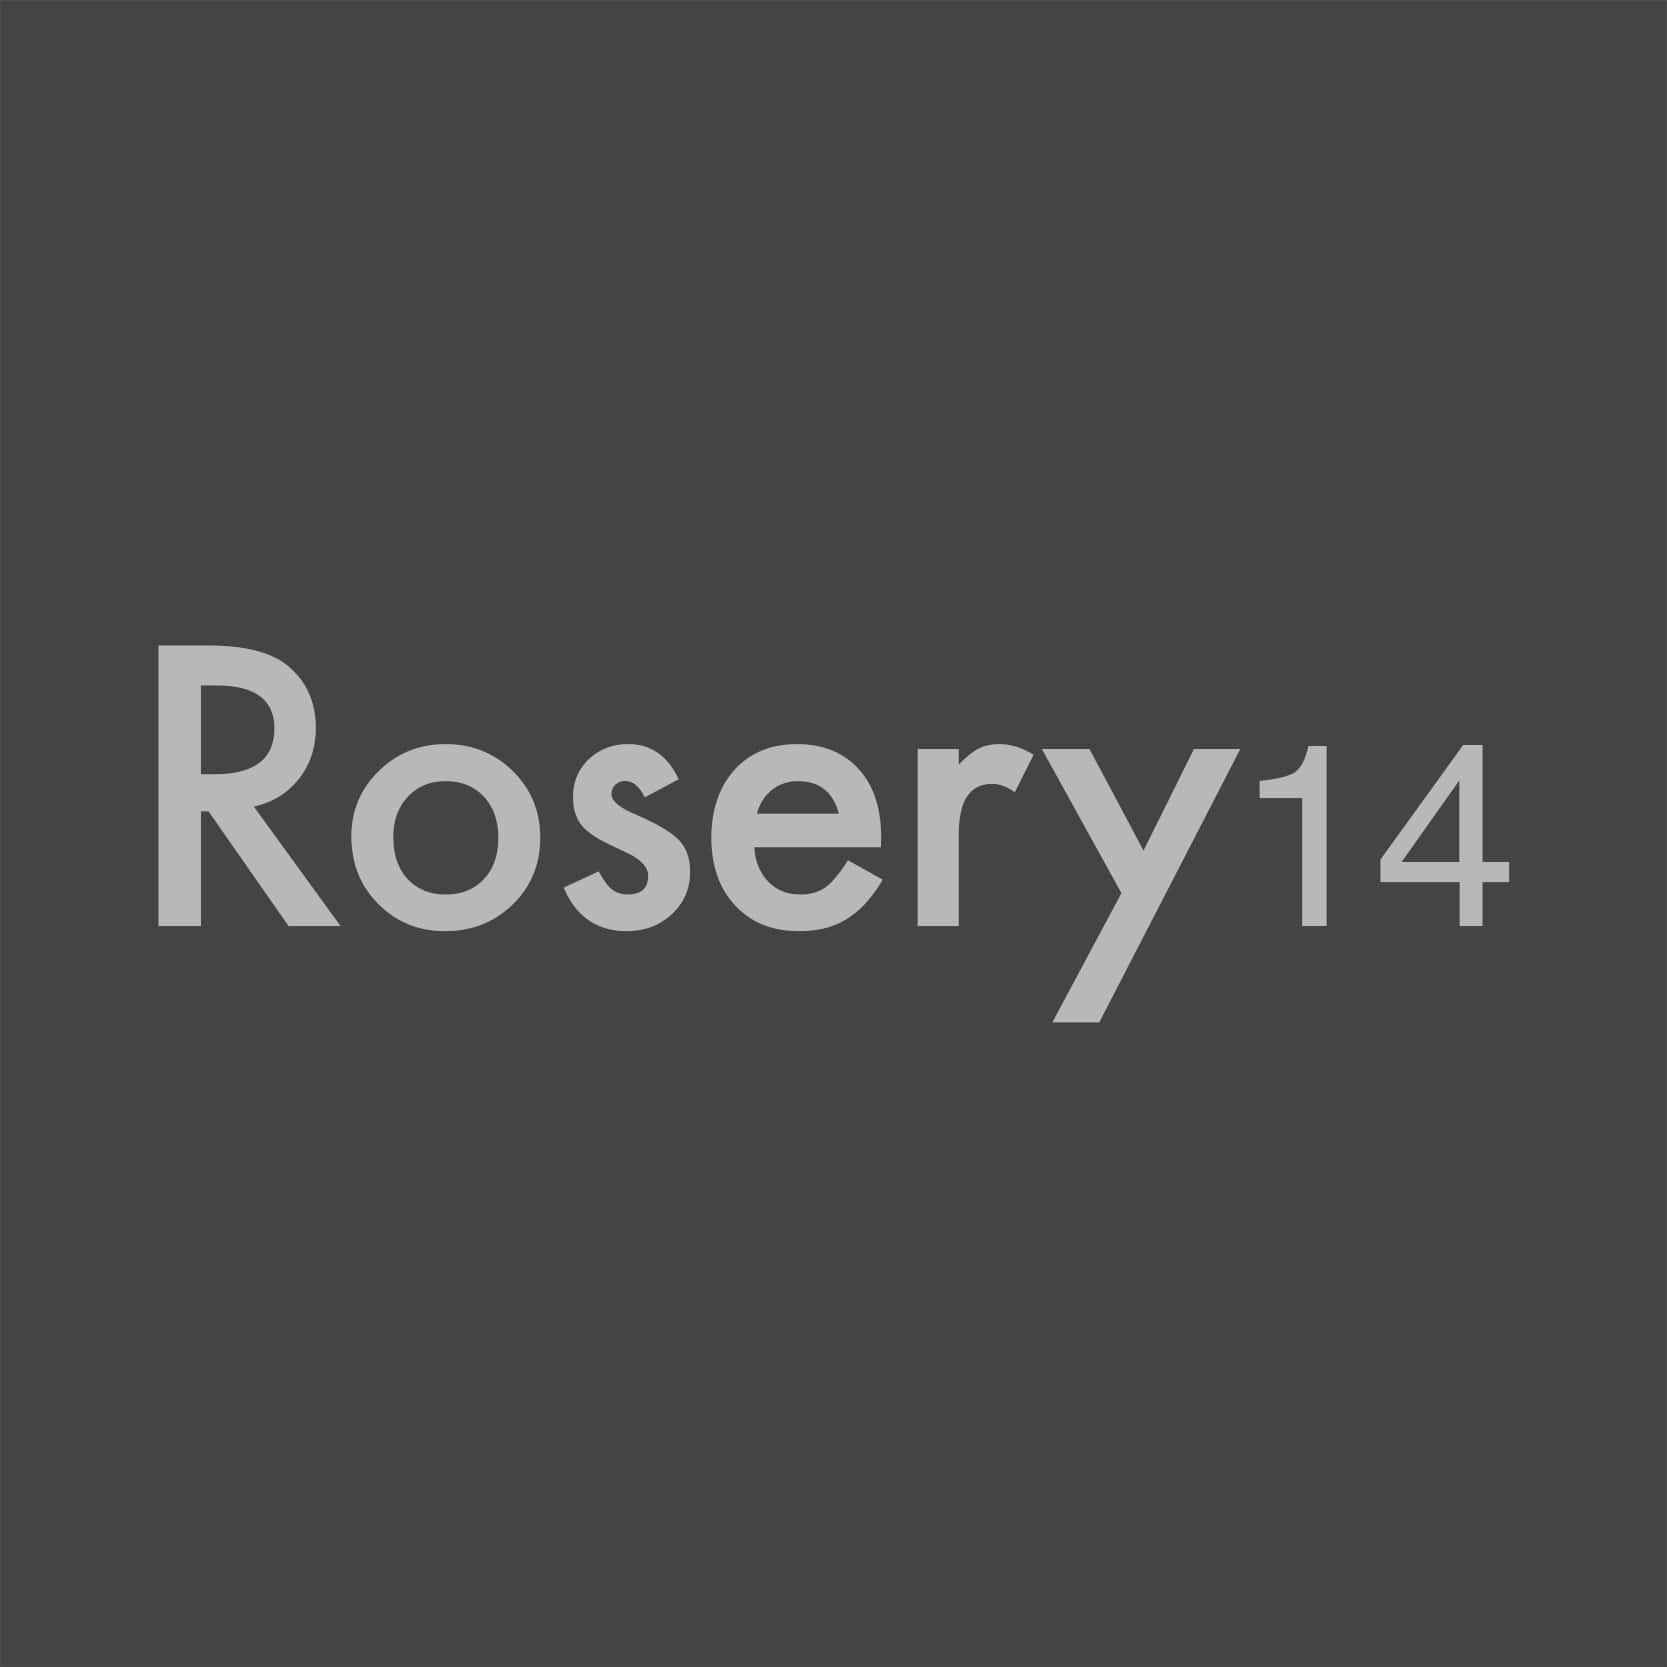 17-11 - Rosery 14 - Content Cover_BW-min.jpg